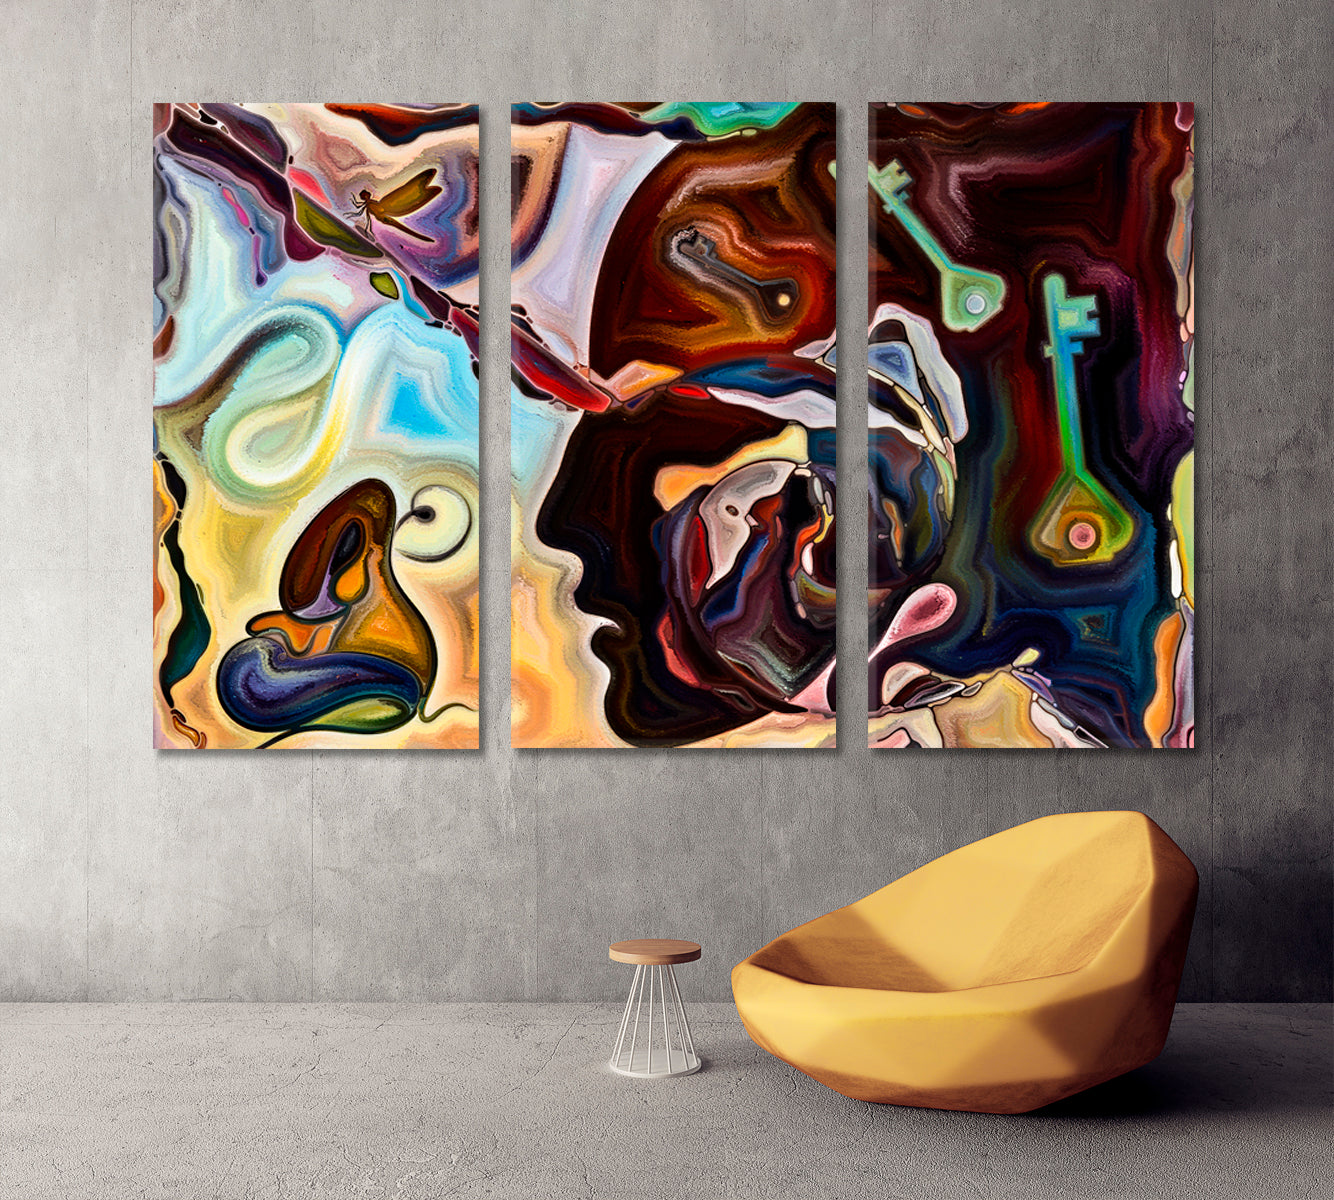 LIVES AND LIFE INSIDE A PAINTING Colorful Abstract Shapes Consciousness Art Artesty 3 panels 36" x 24" 